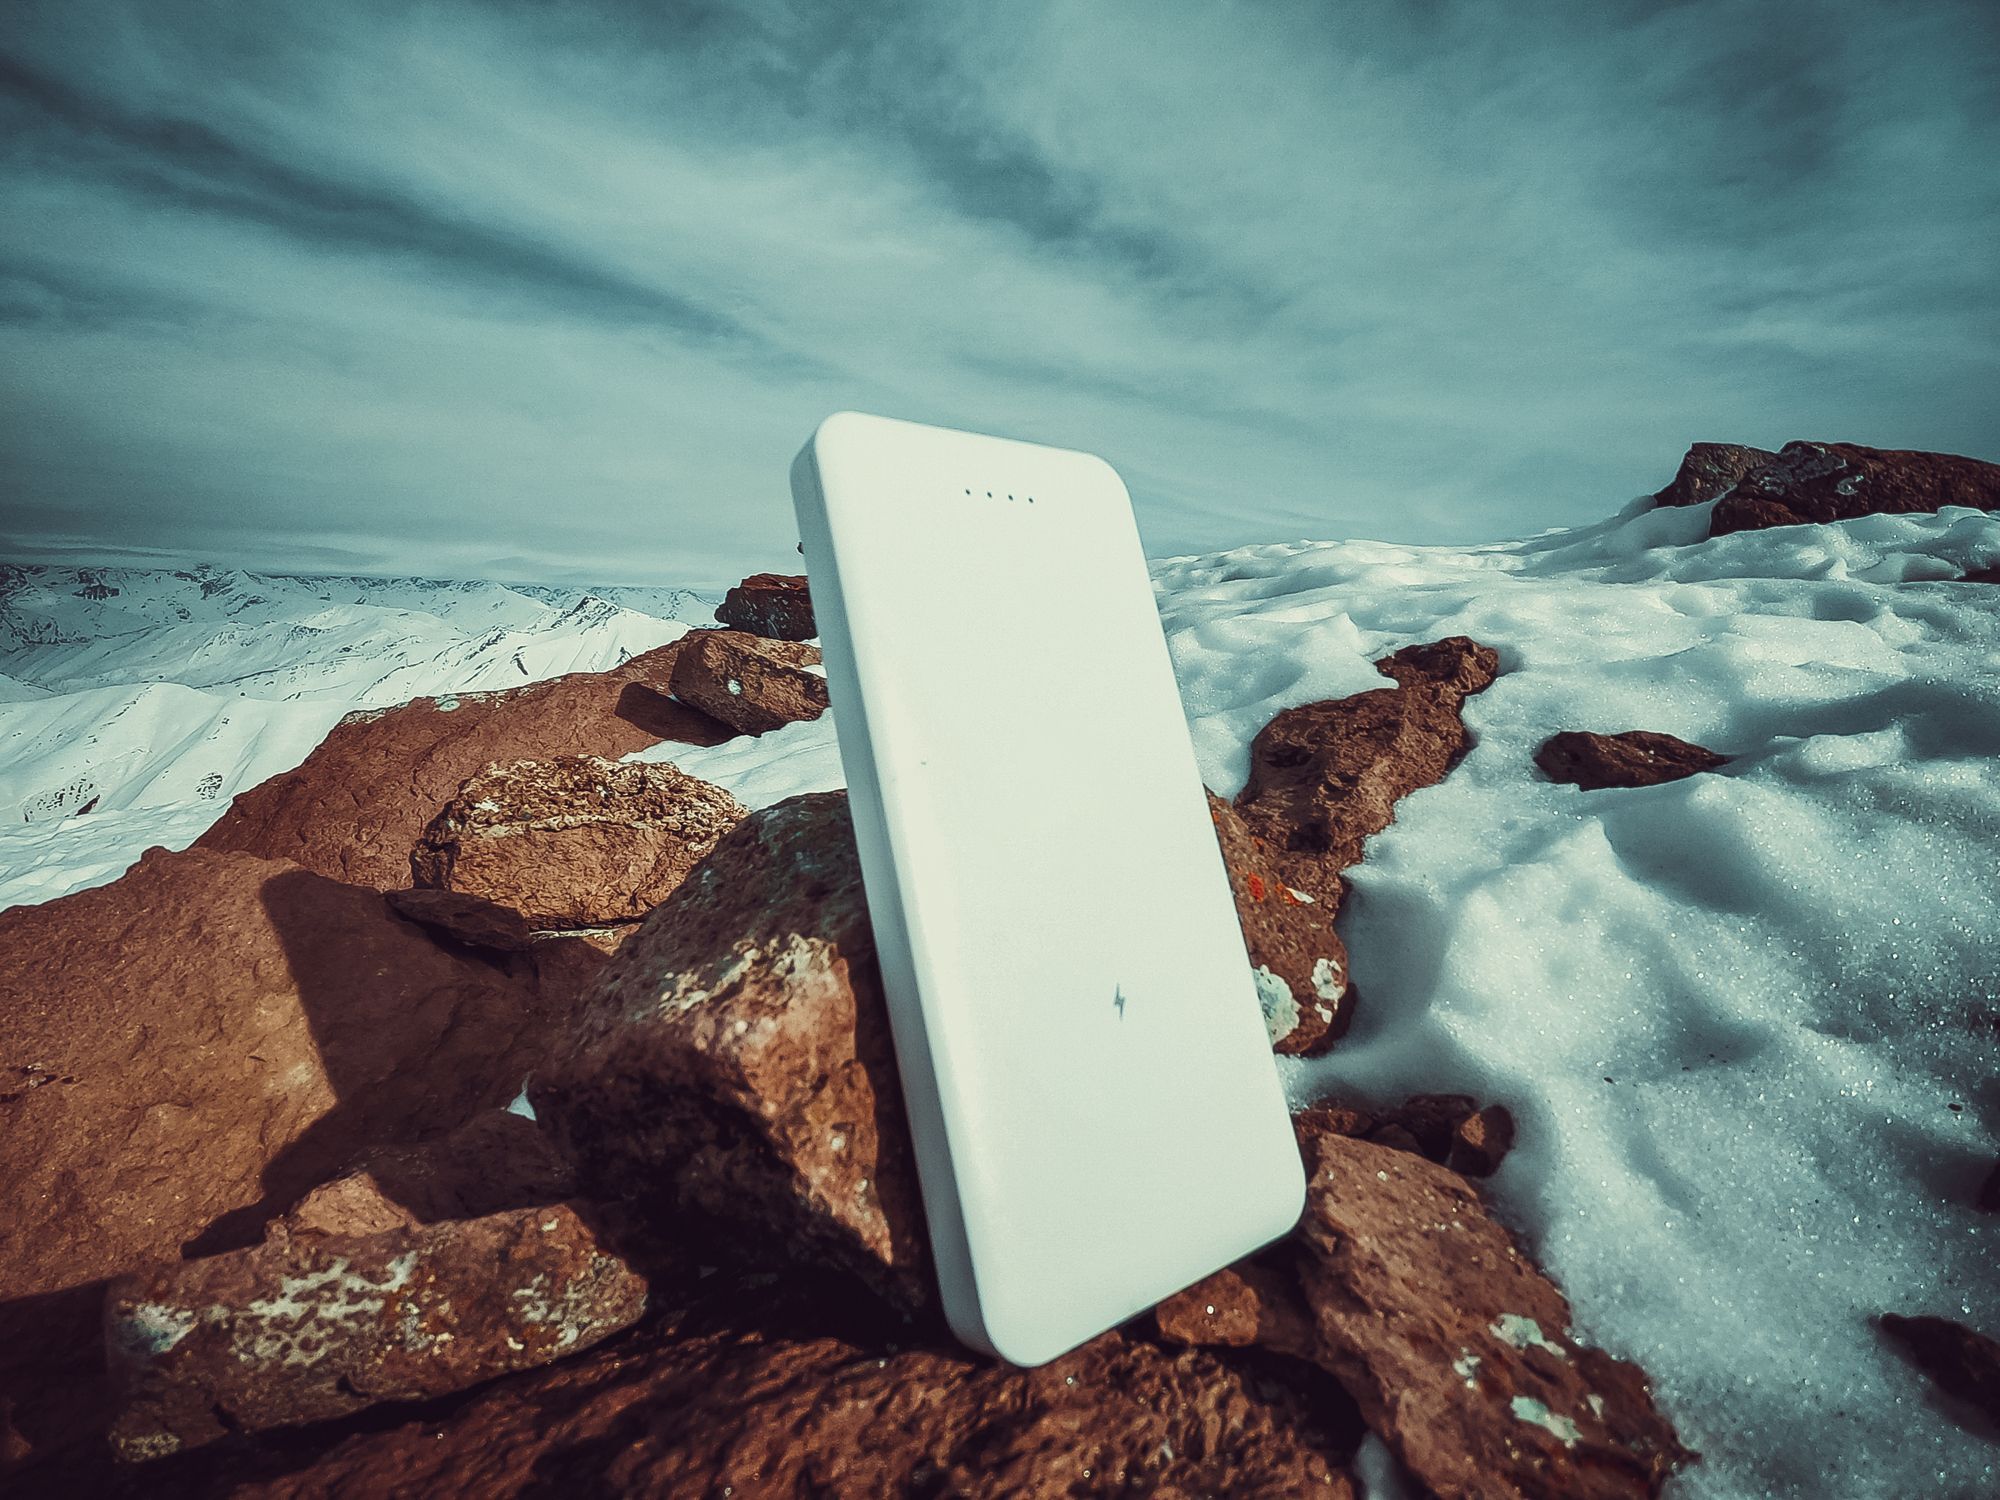 A power bank placed on exposed rock, surrounded by snow.